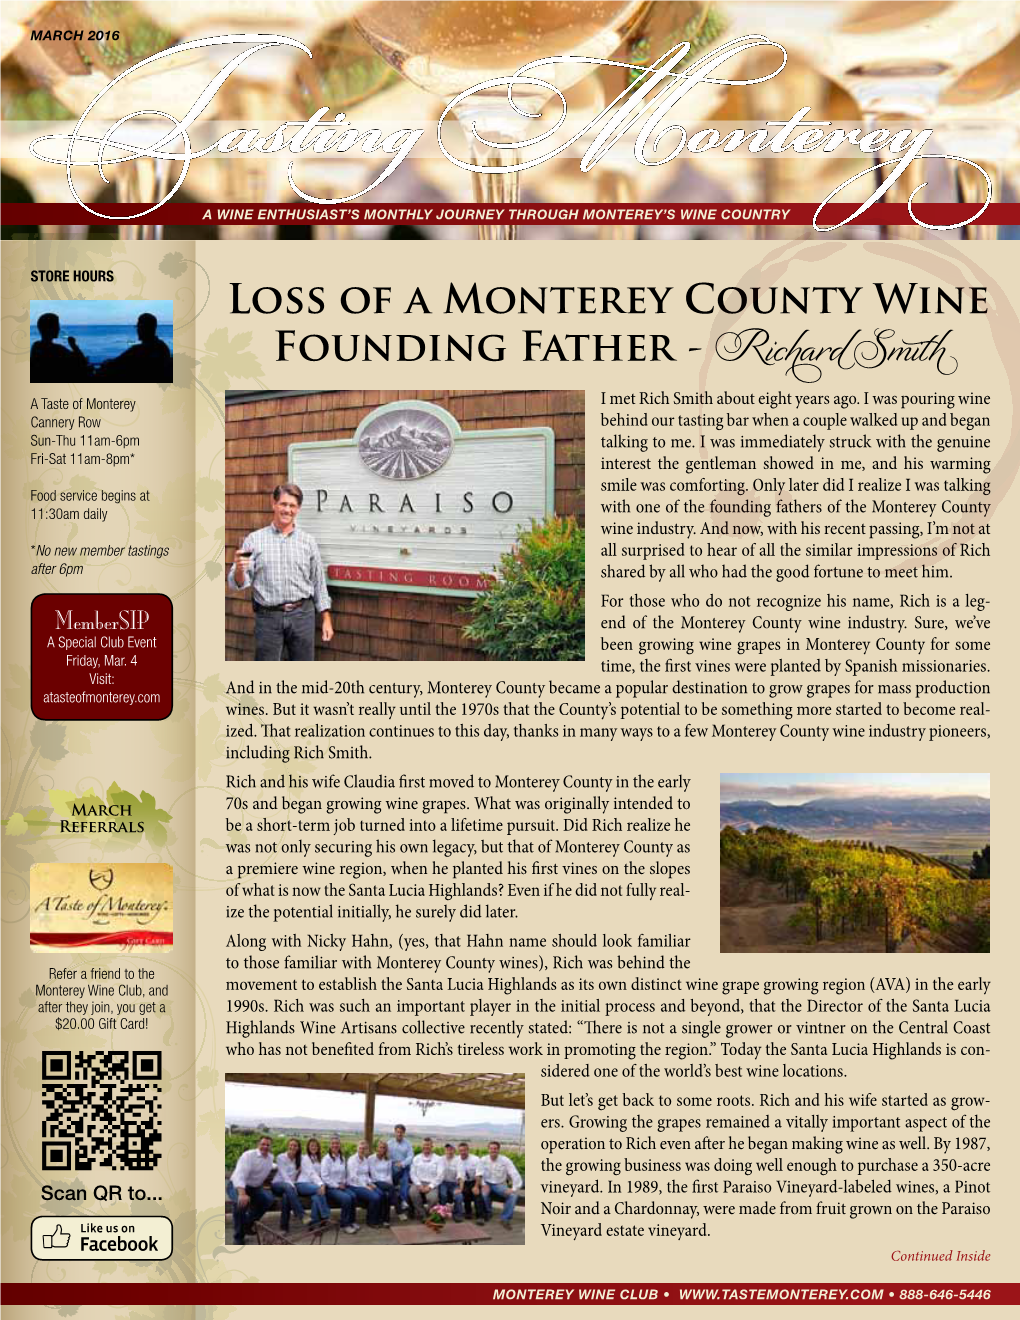 Loss of a Monterey County Wine Founding Father - Richard Smith a Taste of Monterey I Met Rich Smith About Eight Years Ago